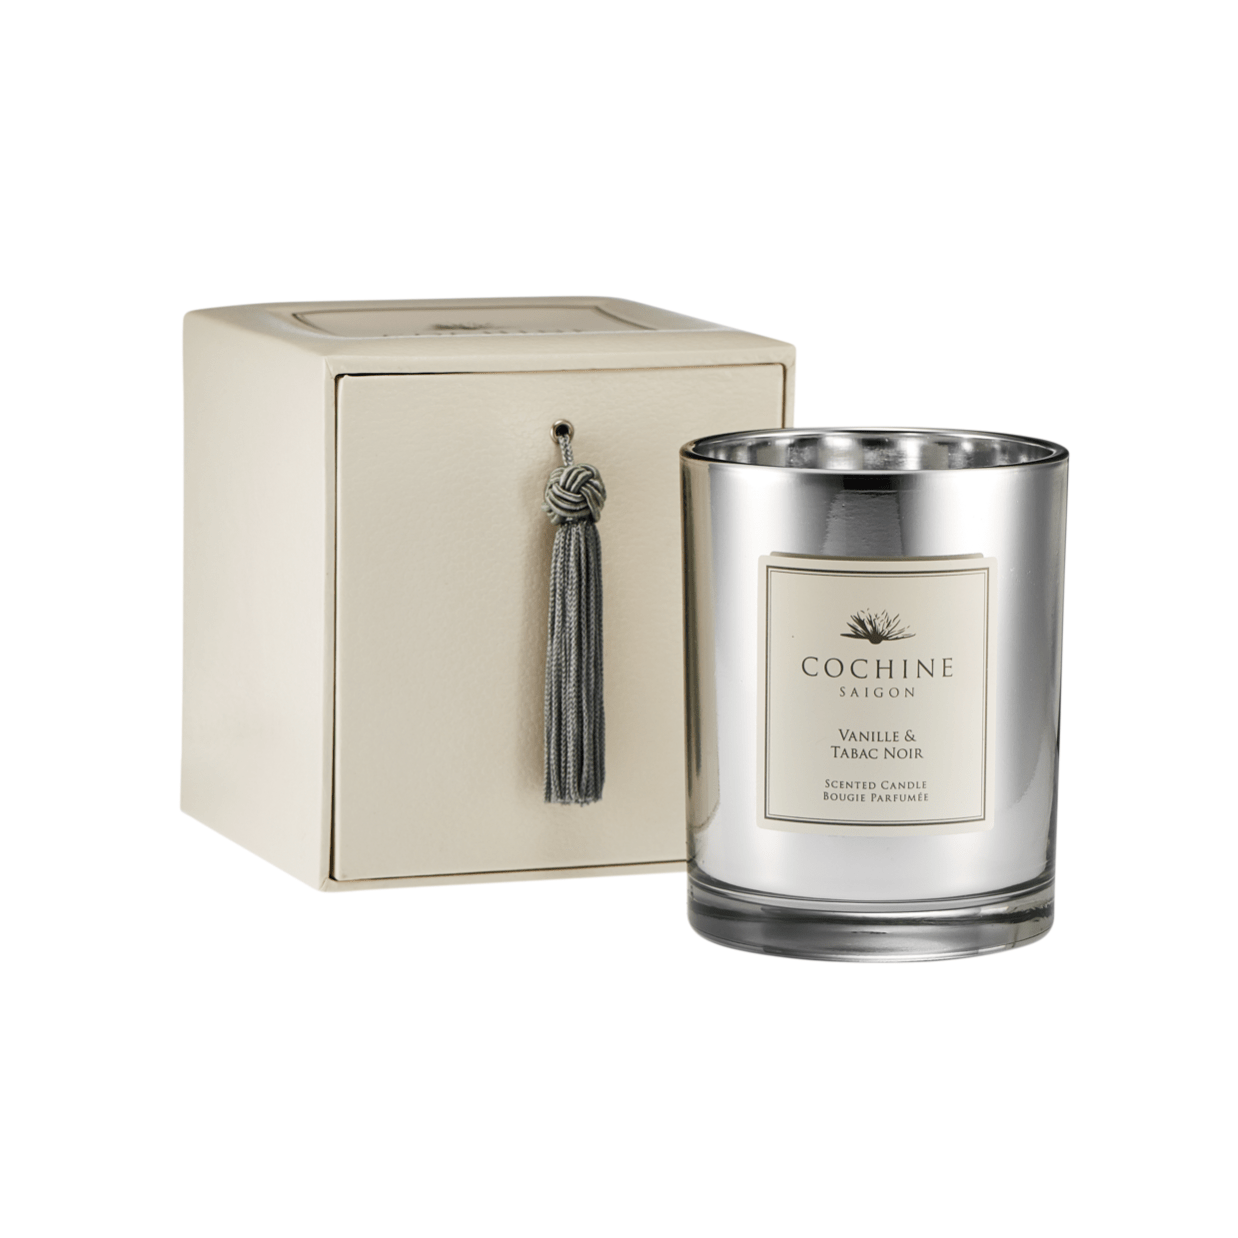 Cochine Home Fragrances of Cochines luxury scented candles and Cochine reed diffuers in Cochine Vanille & Tabac Noir Candle